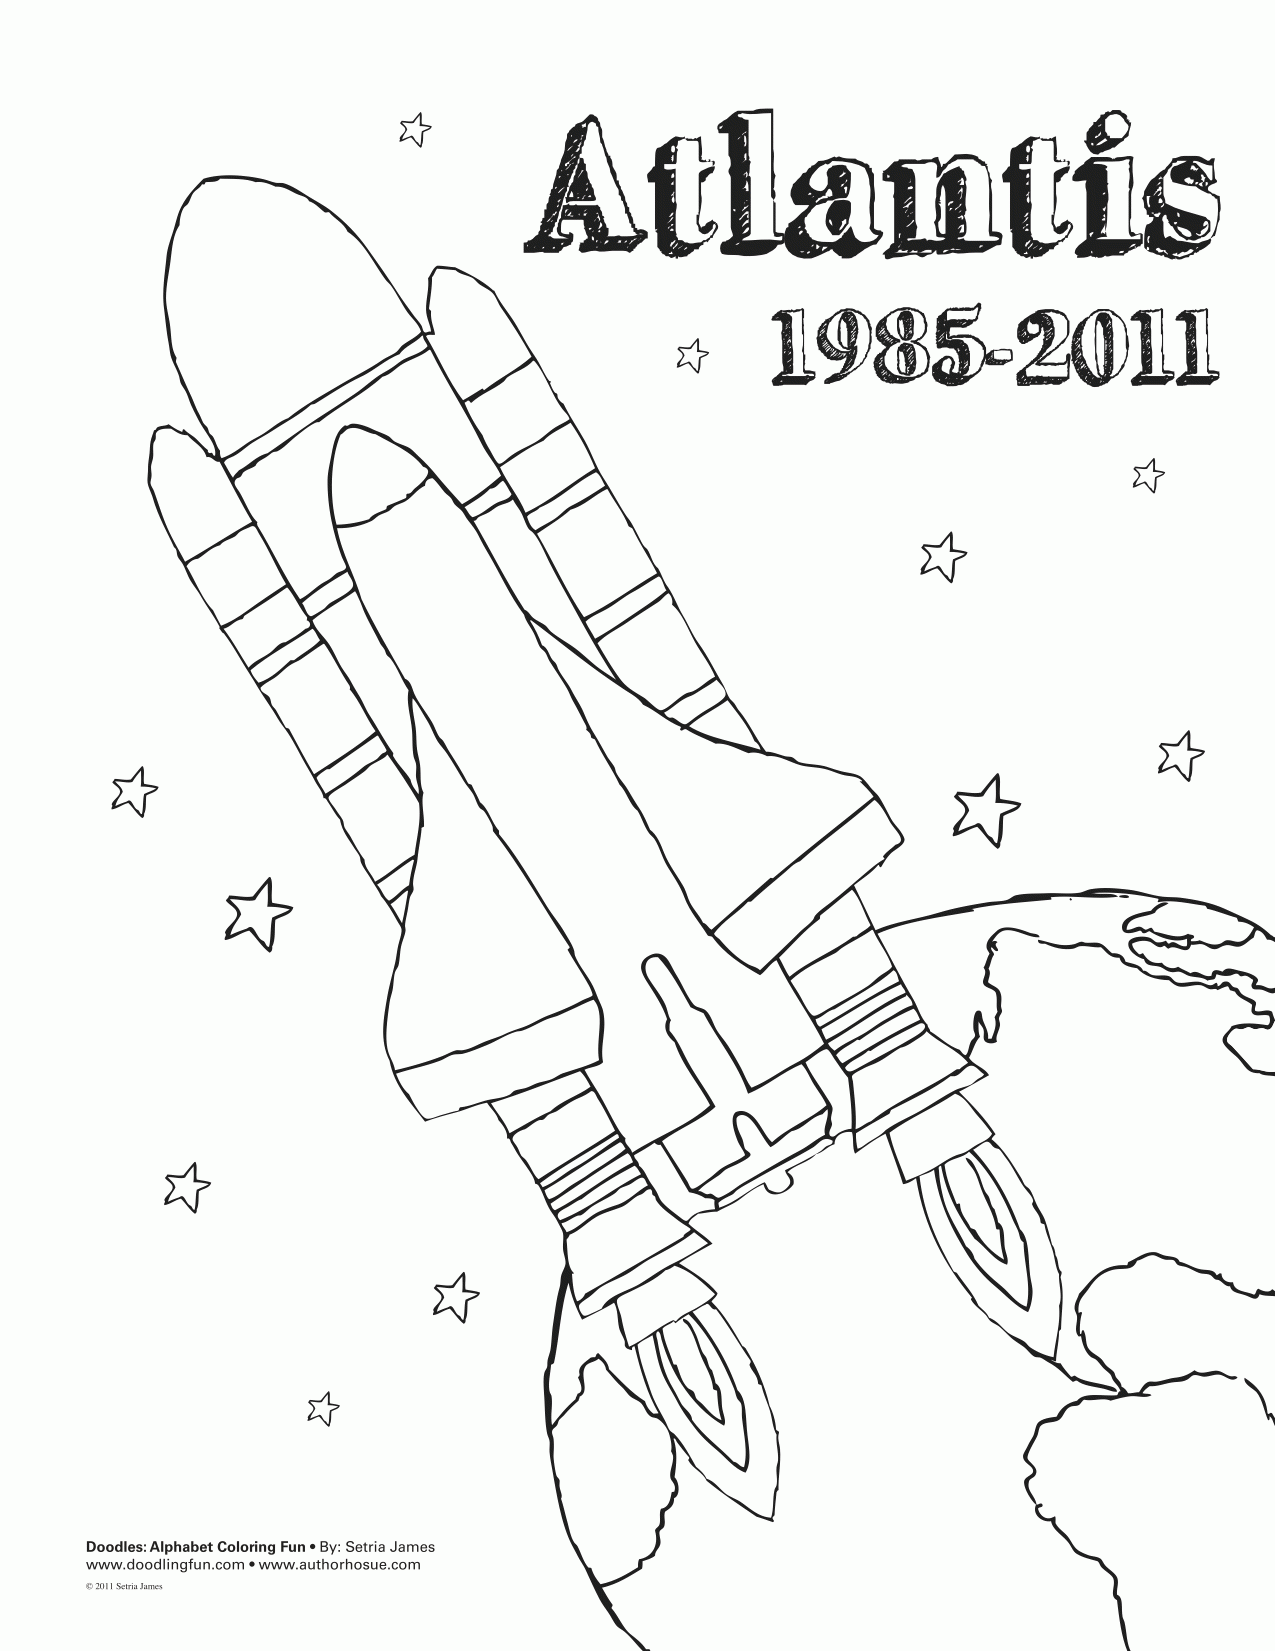 Atlantis Space Shuttle Coloring Page Realistic - Pics about space